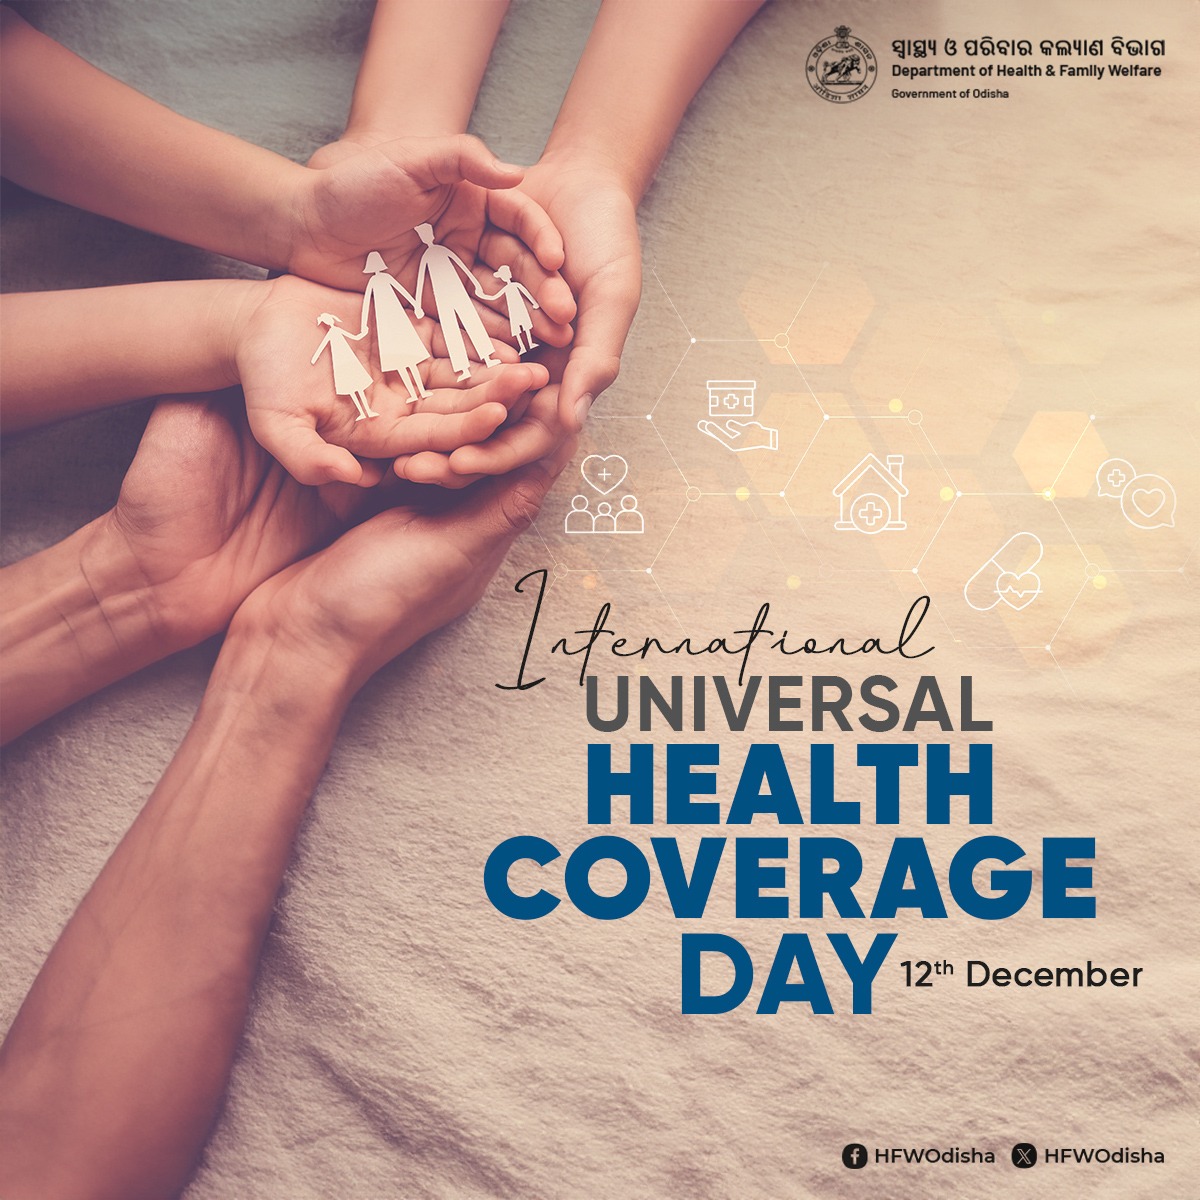 On this #UHCDay, #Odisha is committed to provide premium healthcare services at affordable prices across the State through various schemes and initiatives. #OdishaCares #UniversalHealthCoverage

'Health for All: Time for Action'.